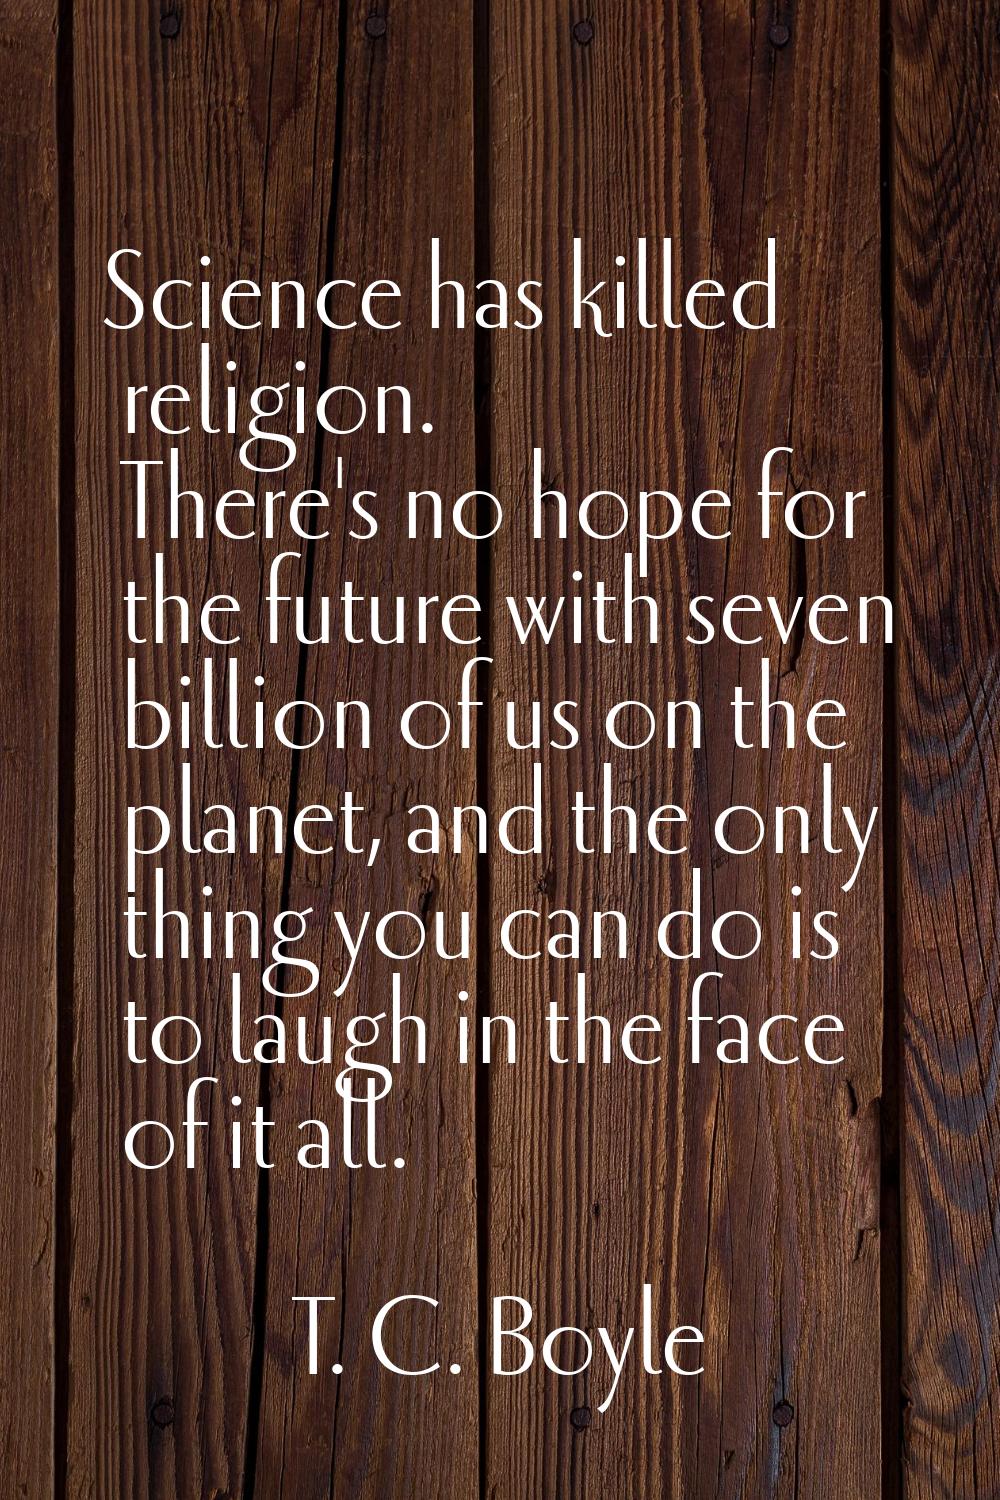 Science has killed religion. There's no hope for the future with seven billion of us on the planet,